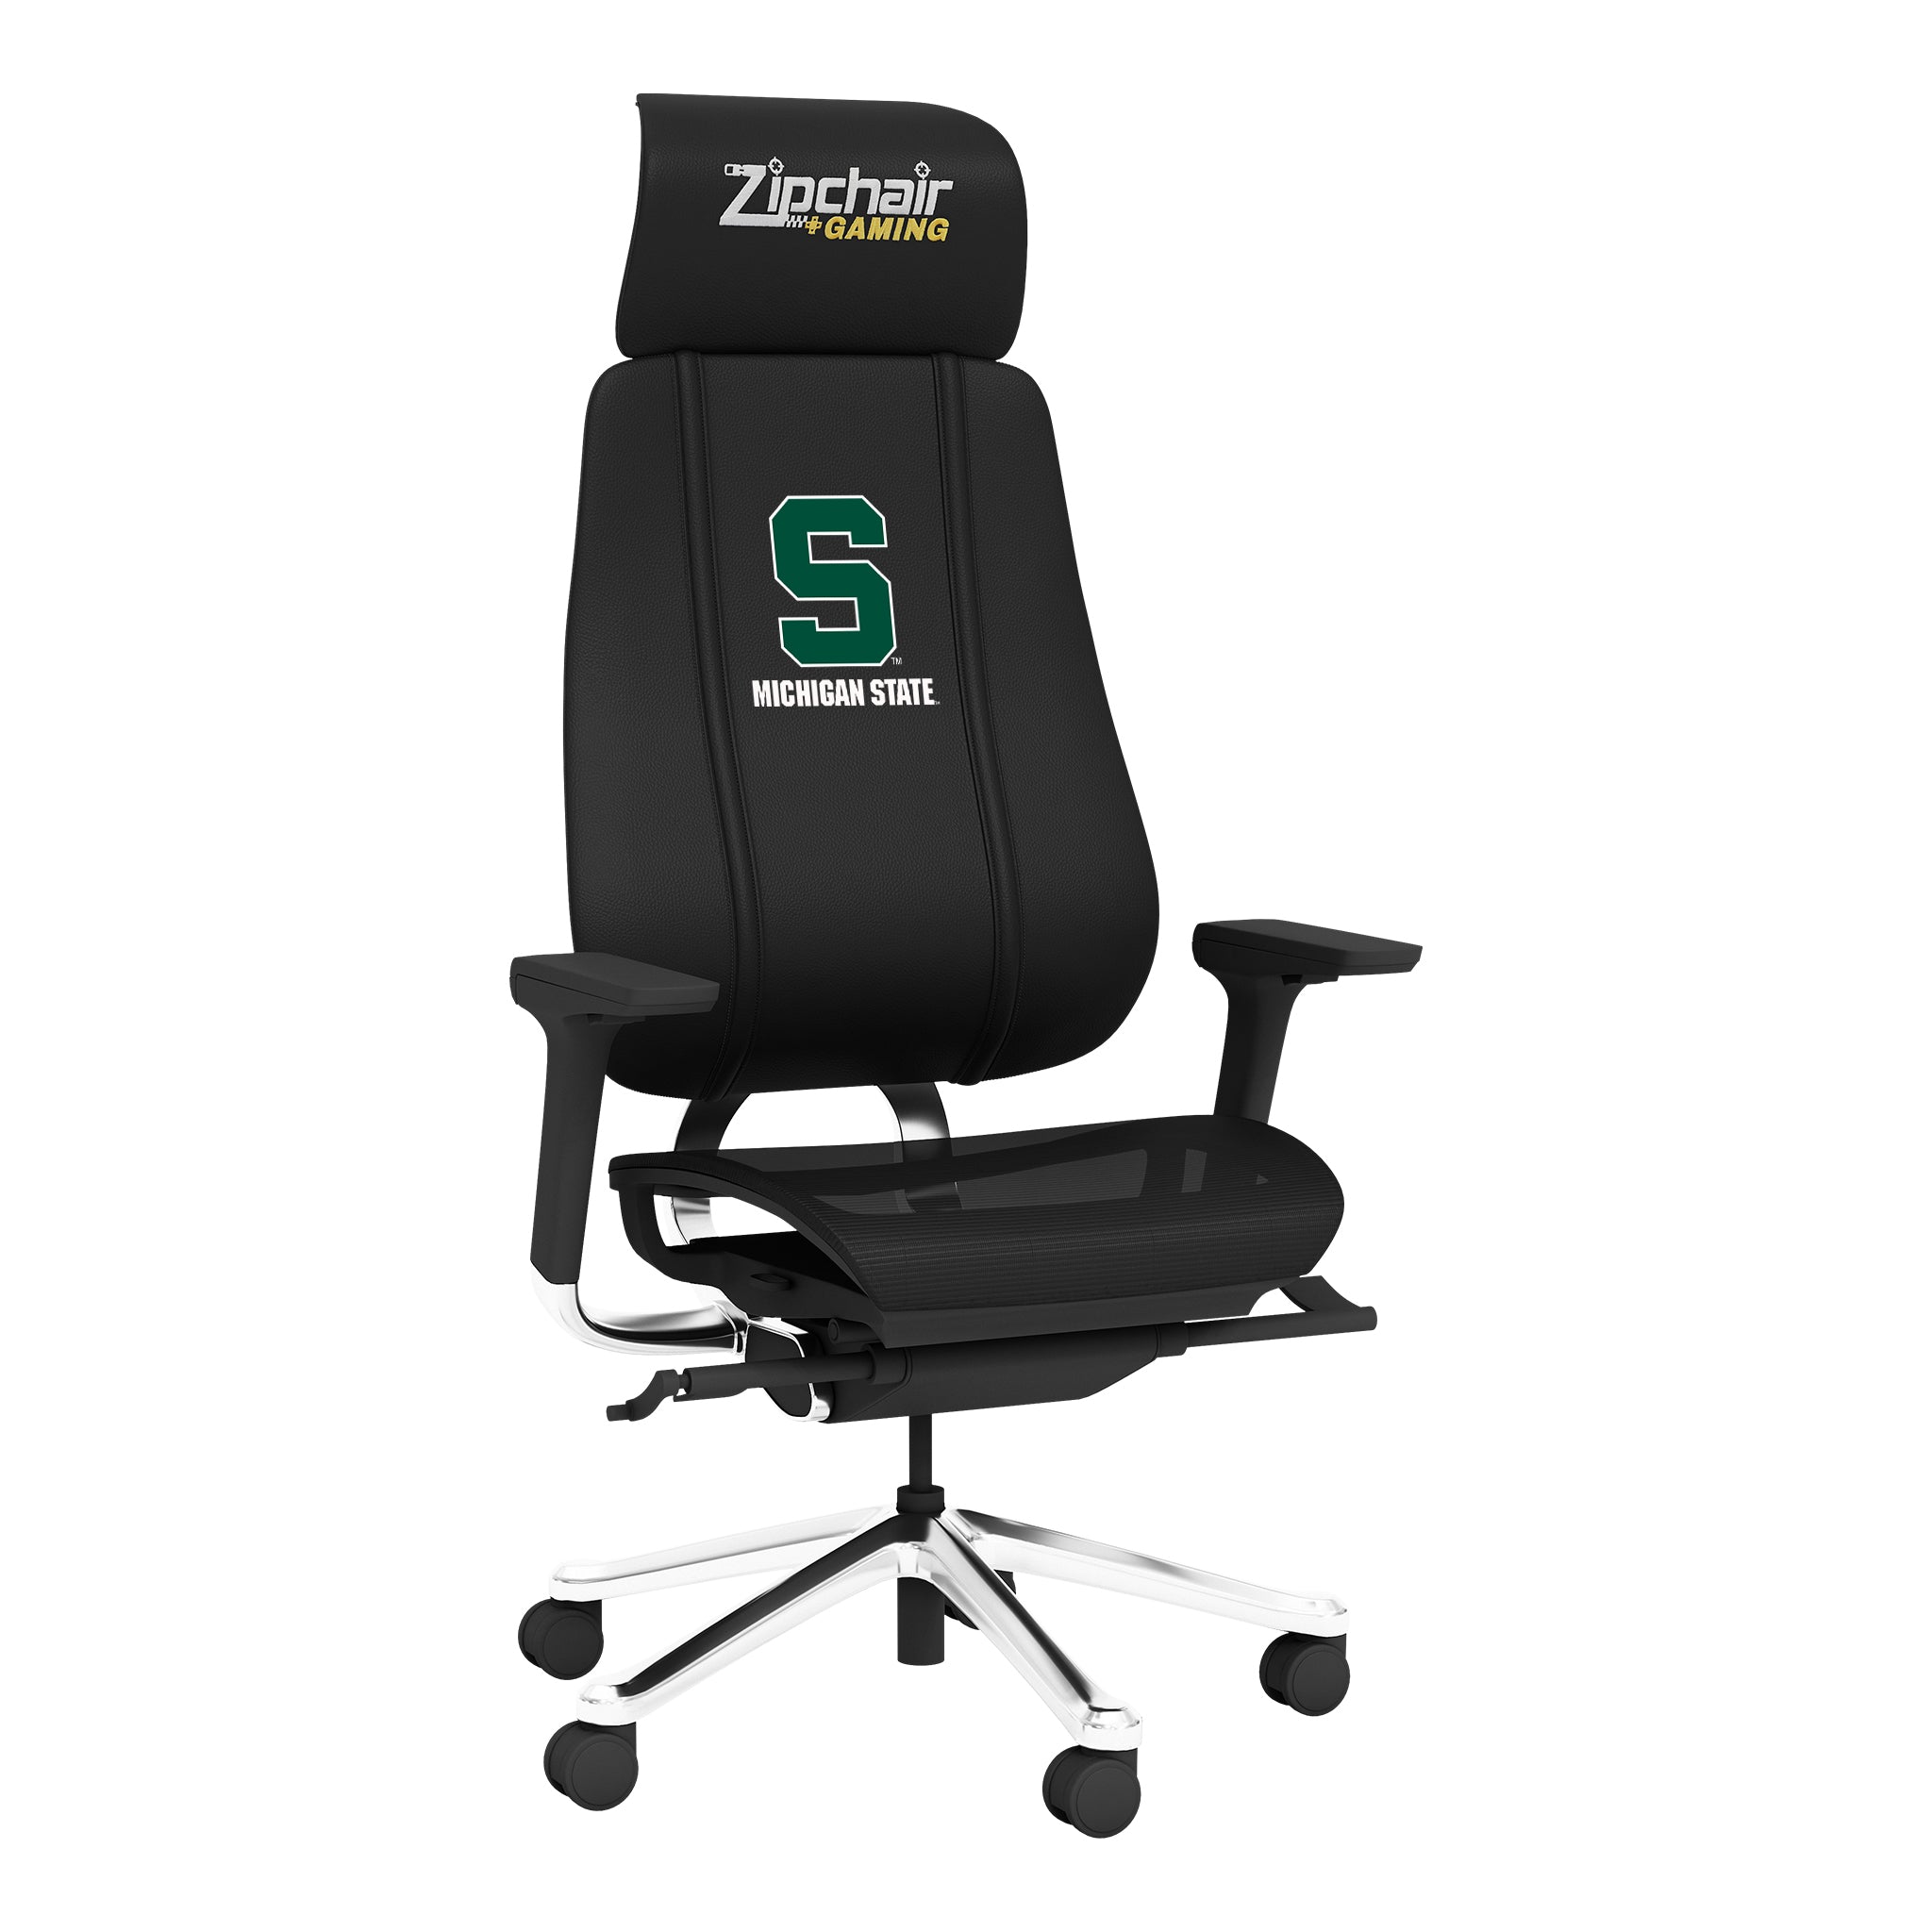 Michigan State PhantomX Gaming Chair with Michigan State Secondary Logo